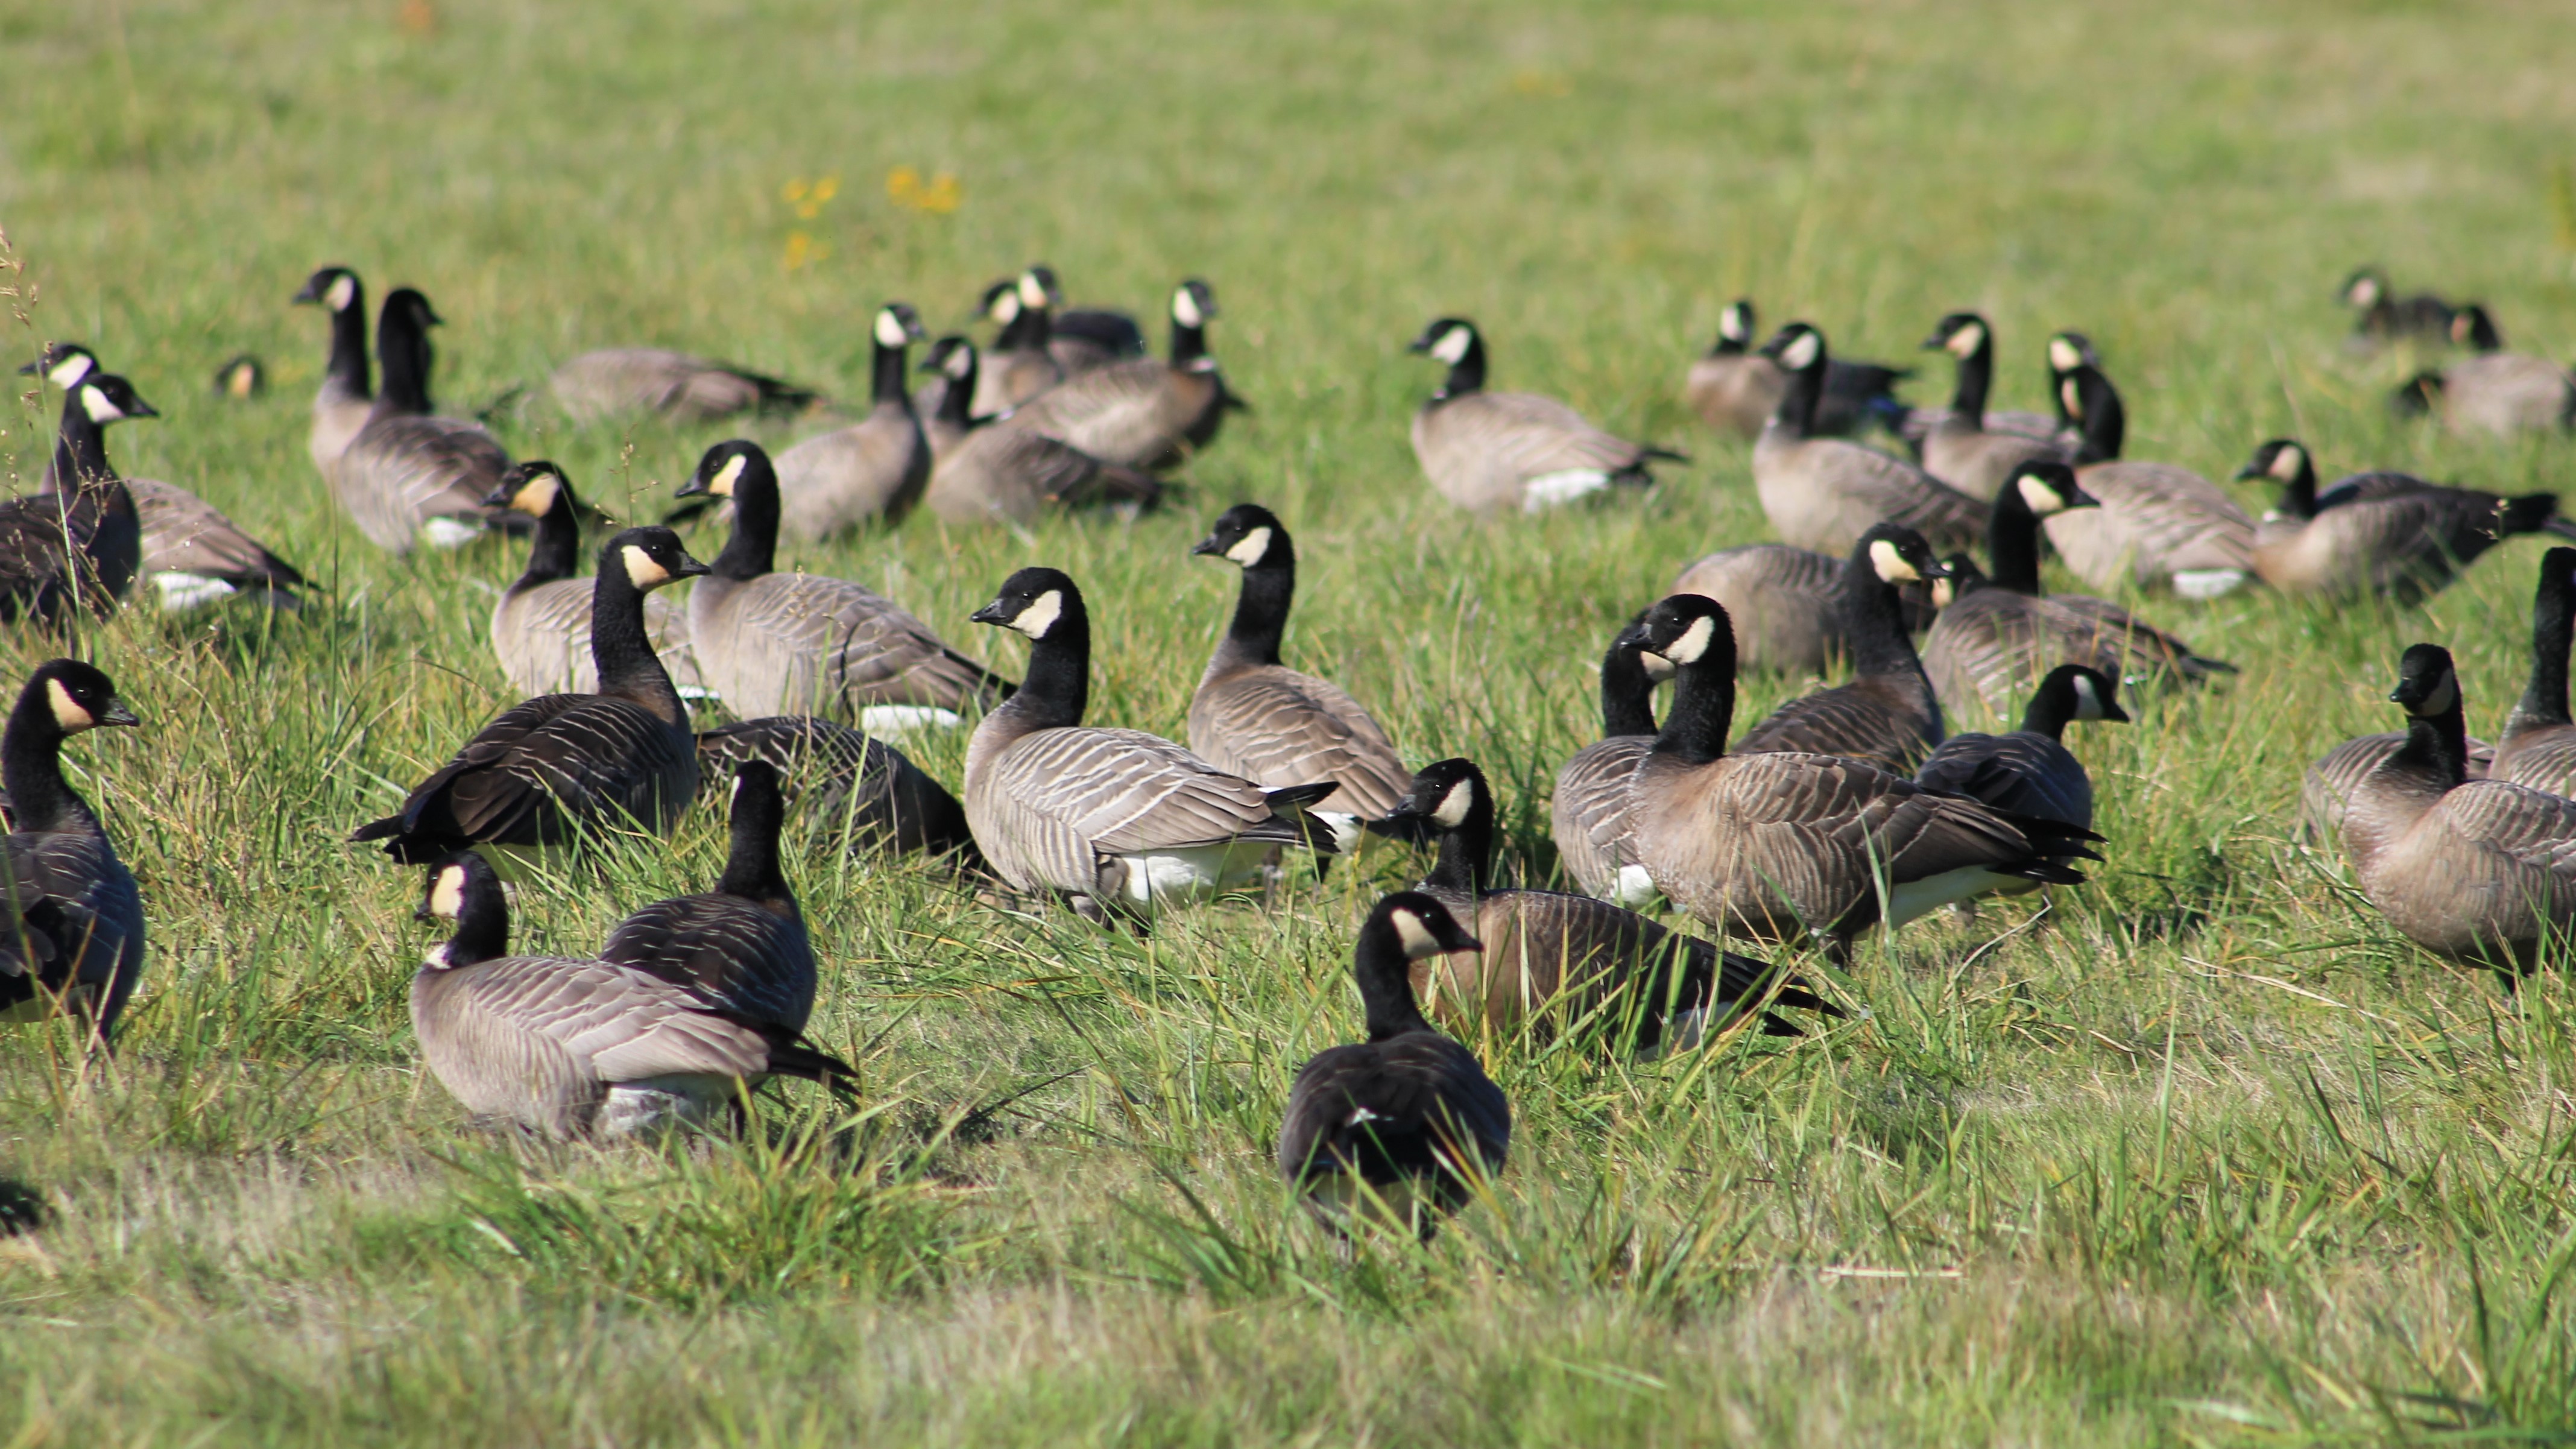 Geese standing in grass